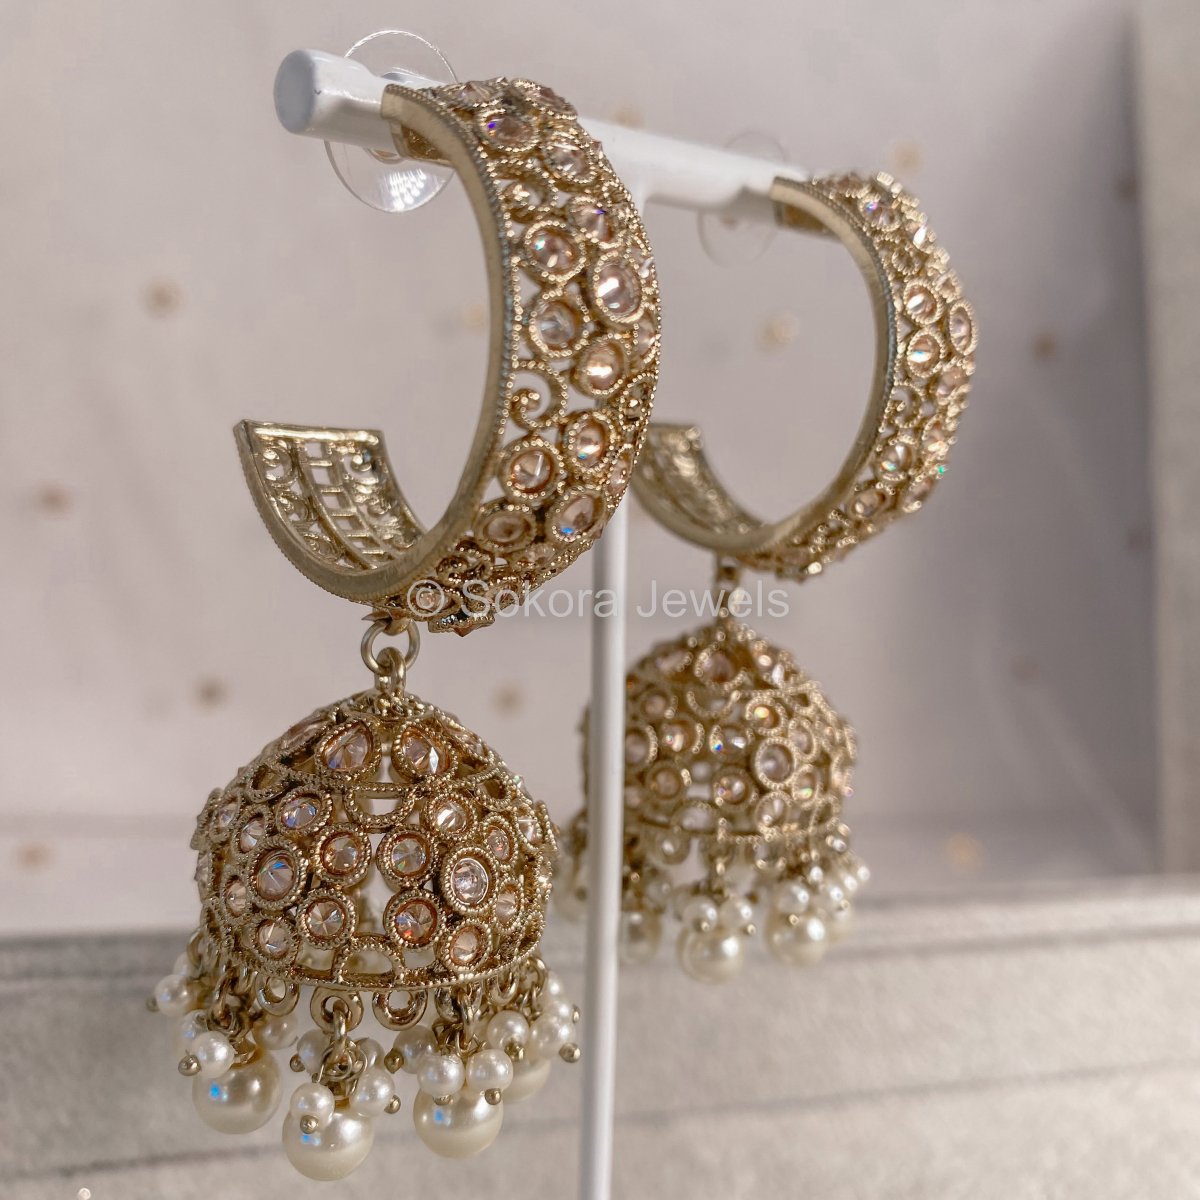 Ethnic Traditional Bollywood Style Big Jhumka Silver Plated Oxidized  Earrings | eBay